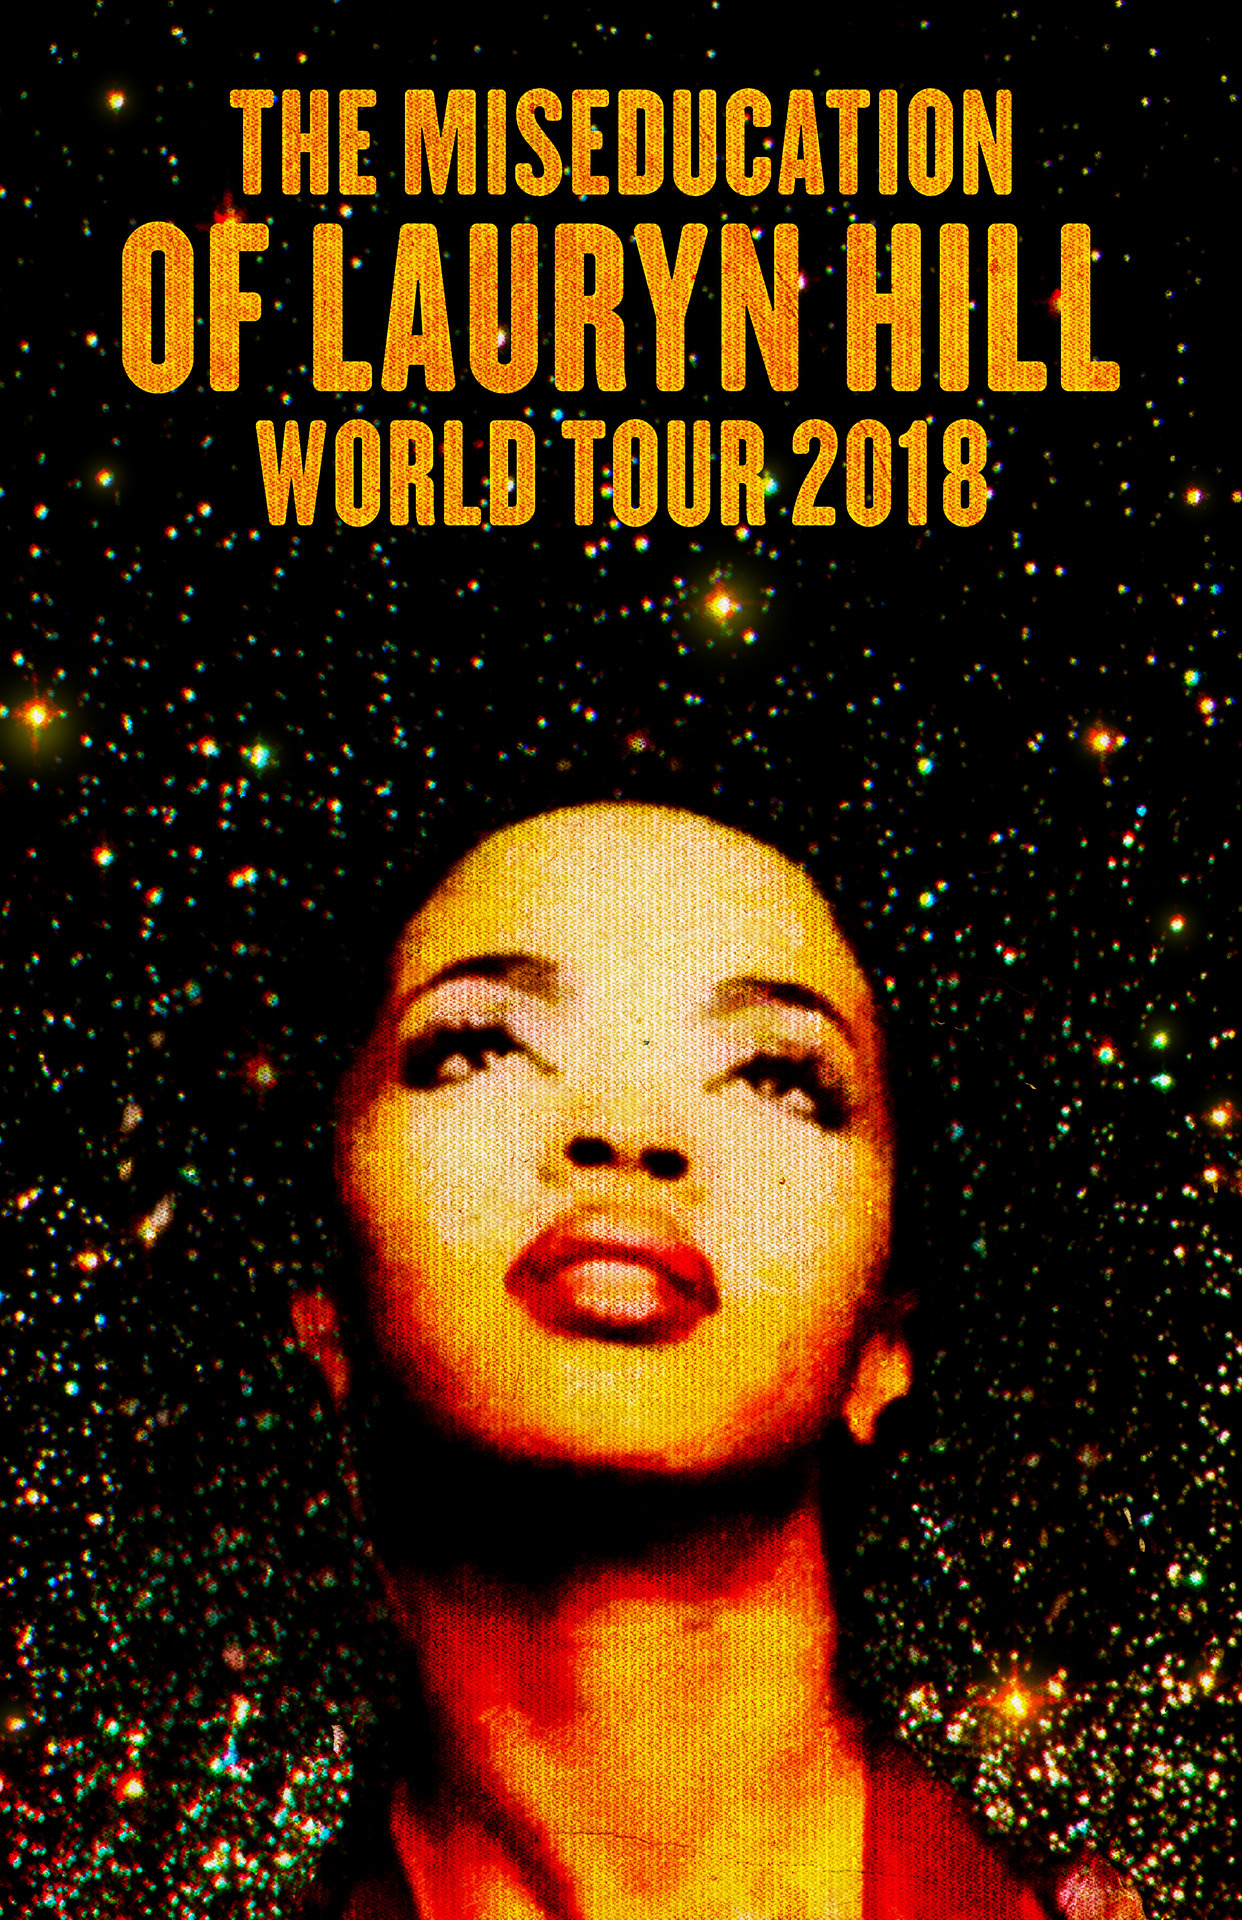 ‘THE MISEDUCATION OF LAURYN HILL 20TH ANNIVERSARY WORLD TOUR’ ANNOUNCED Tickets and VIP Experiences for the North American Portion of the Tour Go On Sale to the General Public Starting Friday, April 20 at LiveNation.com
Citi Presents Ms. Lauryn Hill...